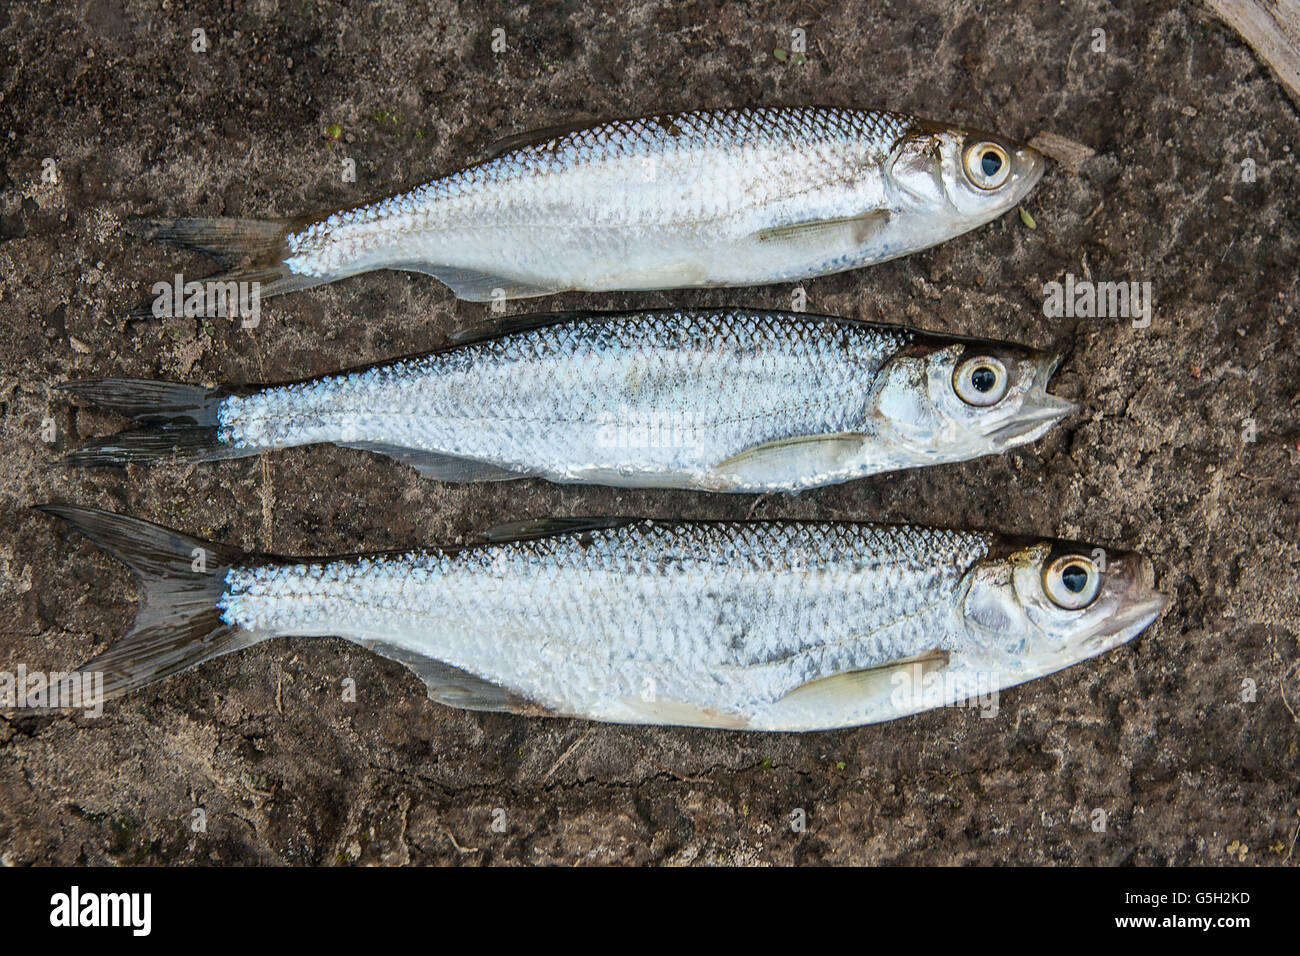 Freshwater fish just taken from the water. Several ablet or bleak fish on natural background. Catching fish - common bleak Stock Photo